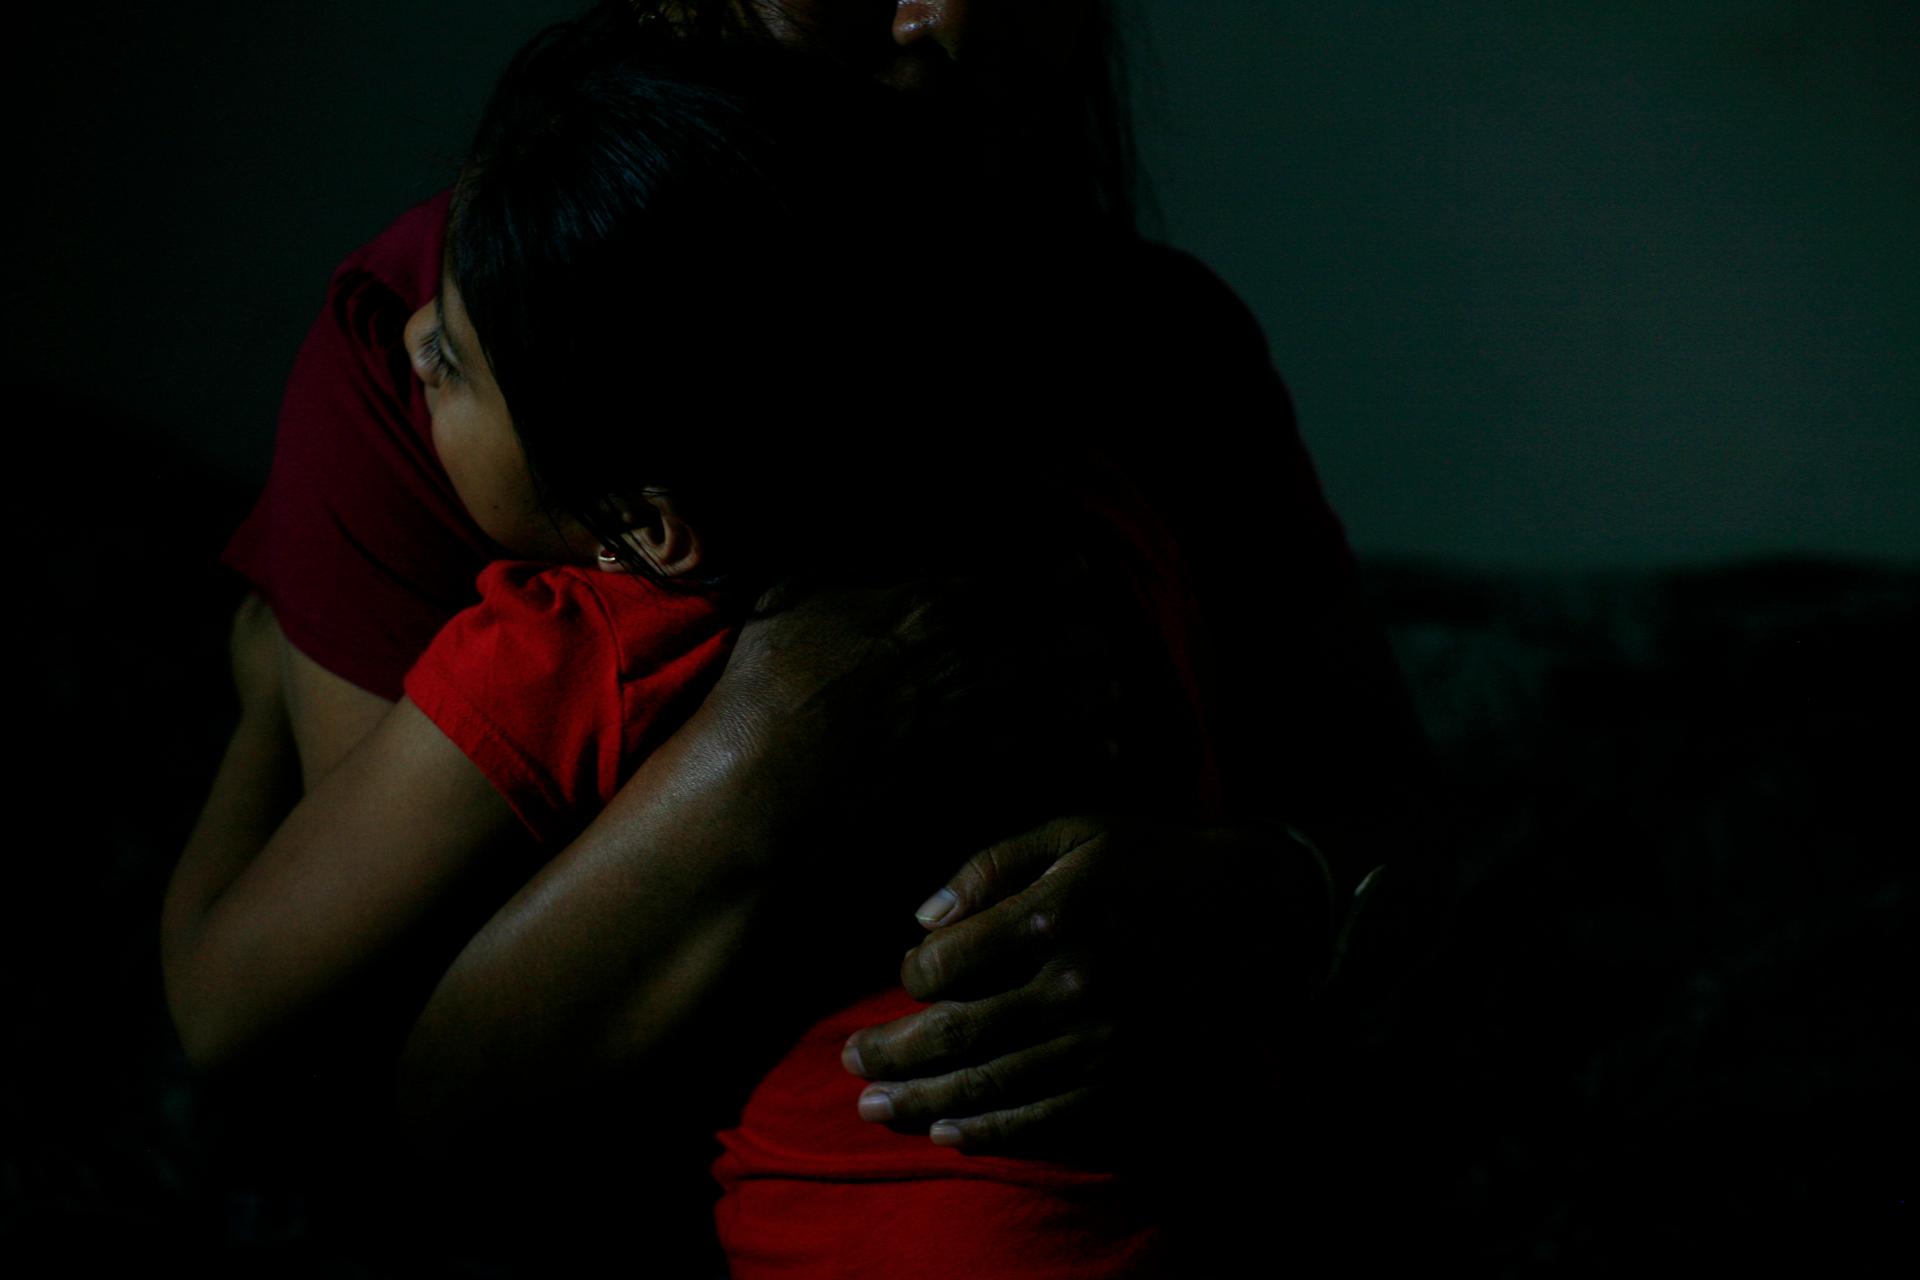 Woman embracing young girl, faces not shown